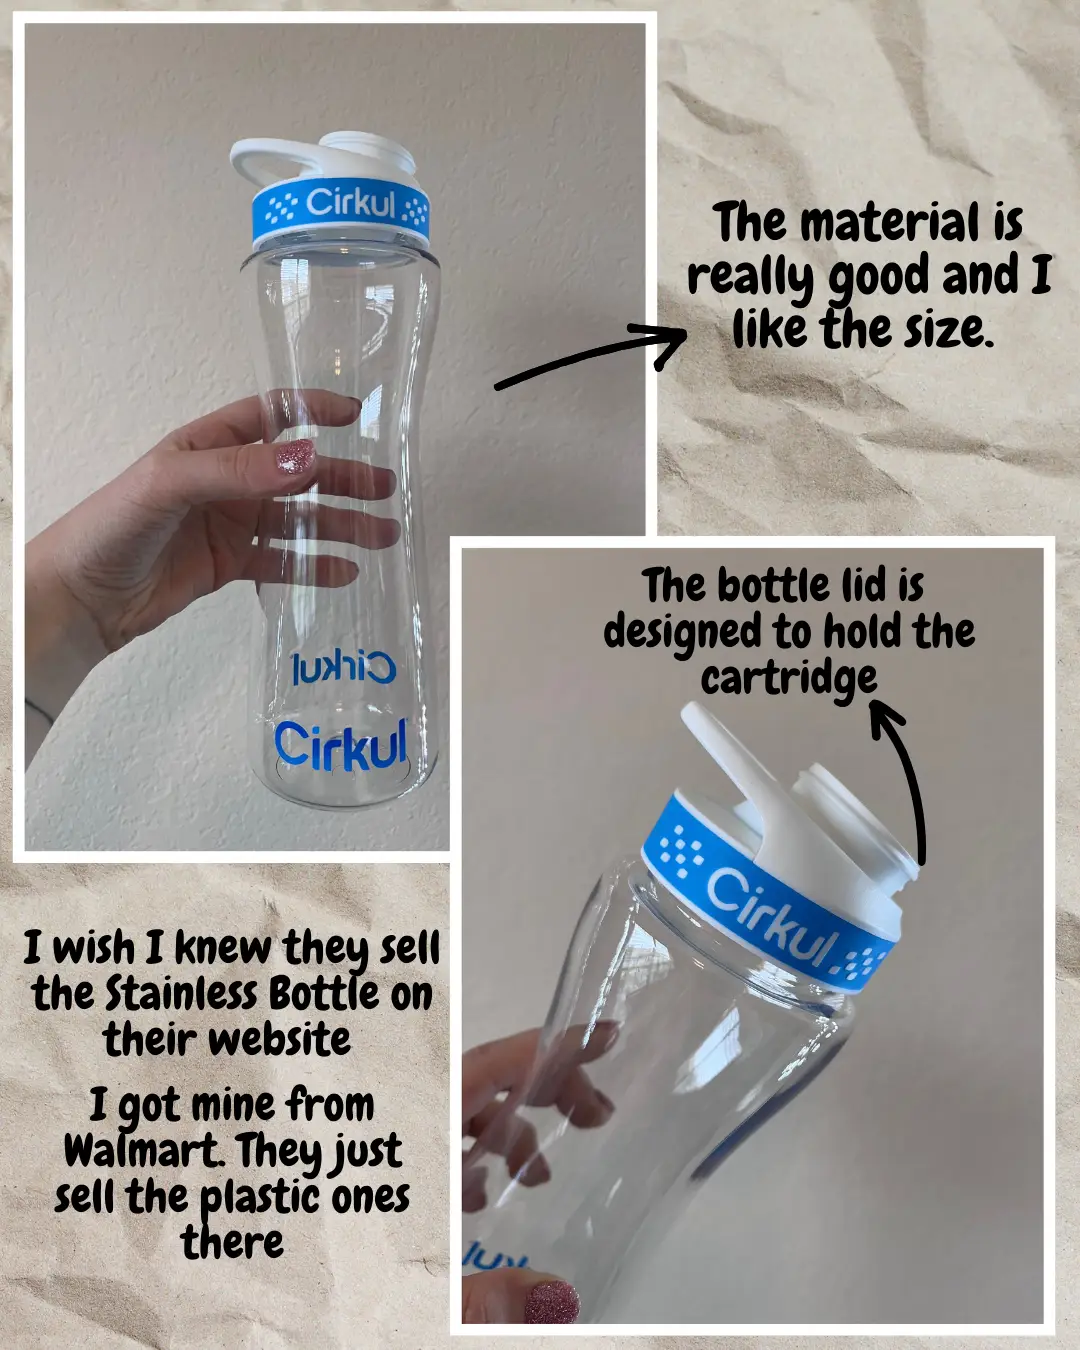 Cirkul water bottles, Gallery posted by natalie dillon